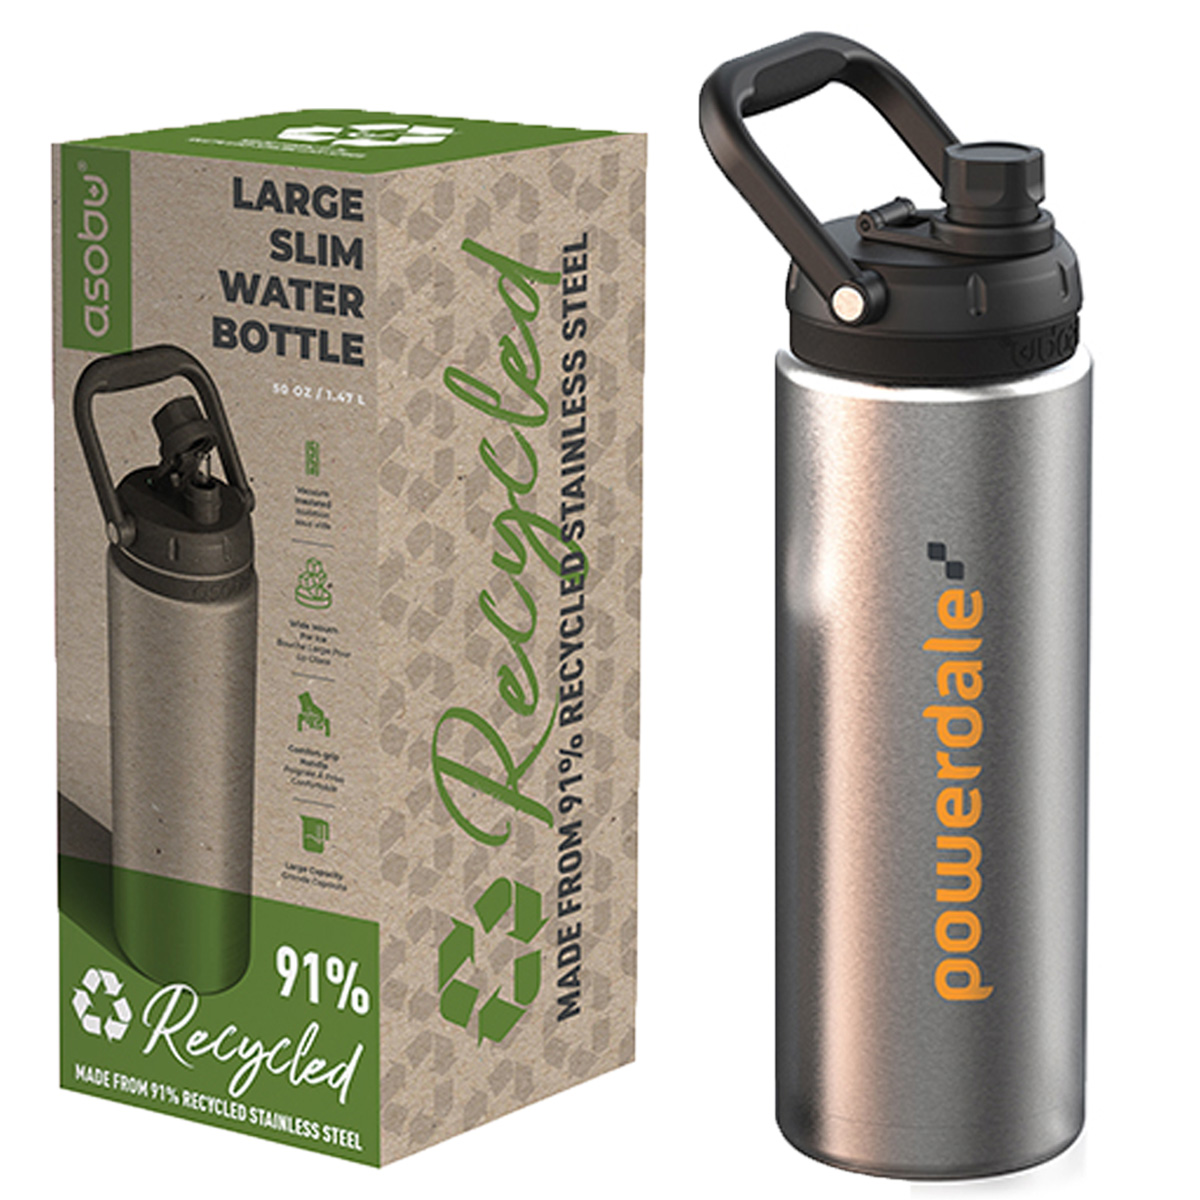 Recycled Stainless Steel Water Bottle Handle Lid | 40 oz